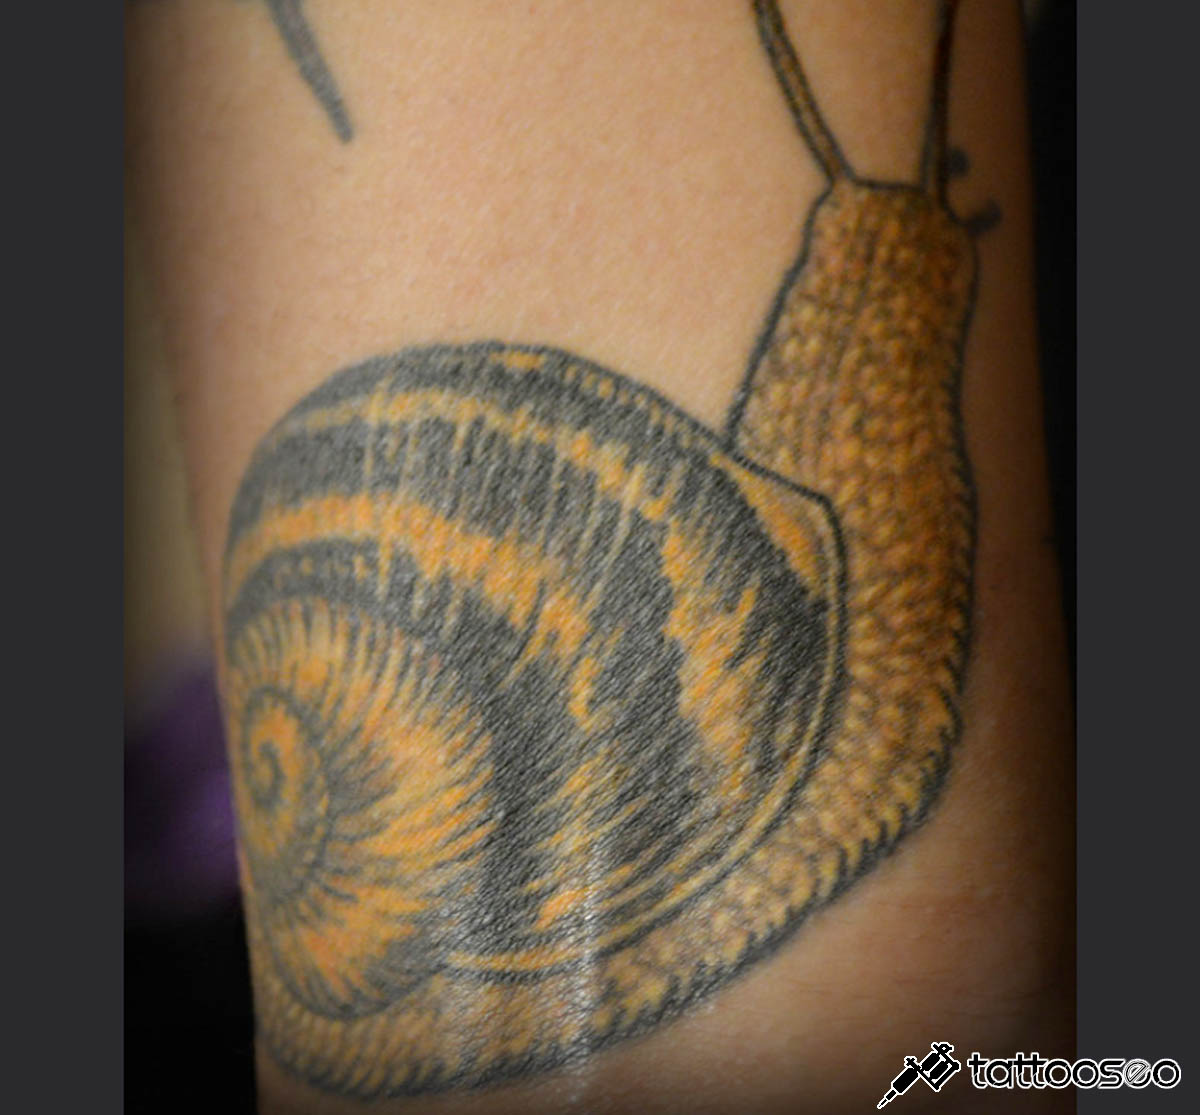 Snail tattoo meaning